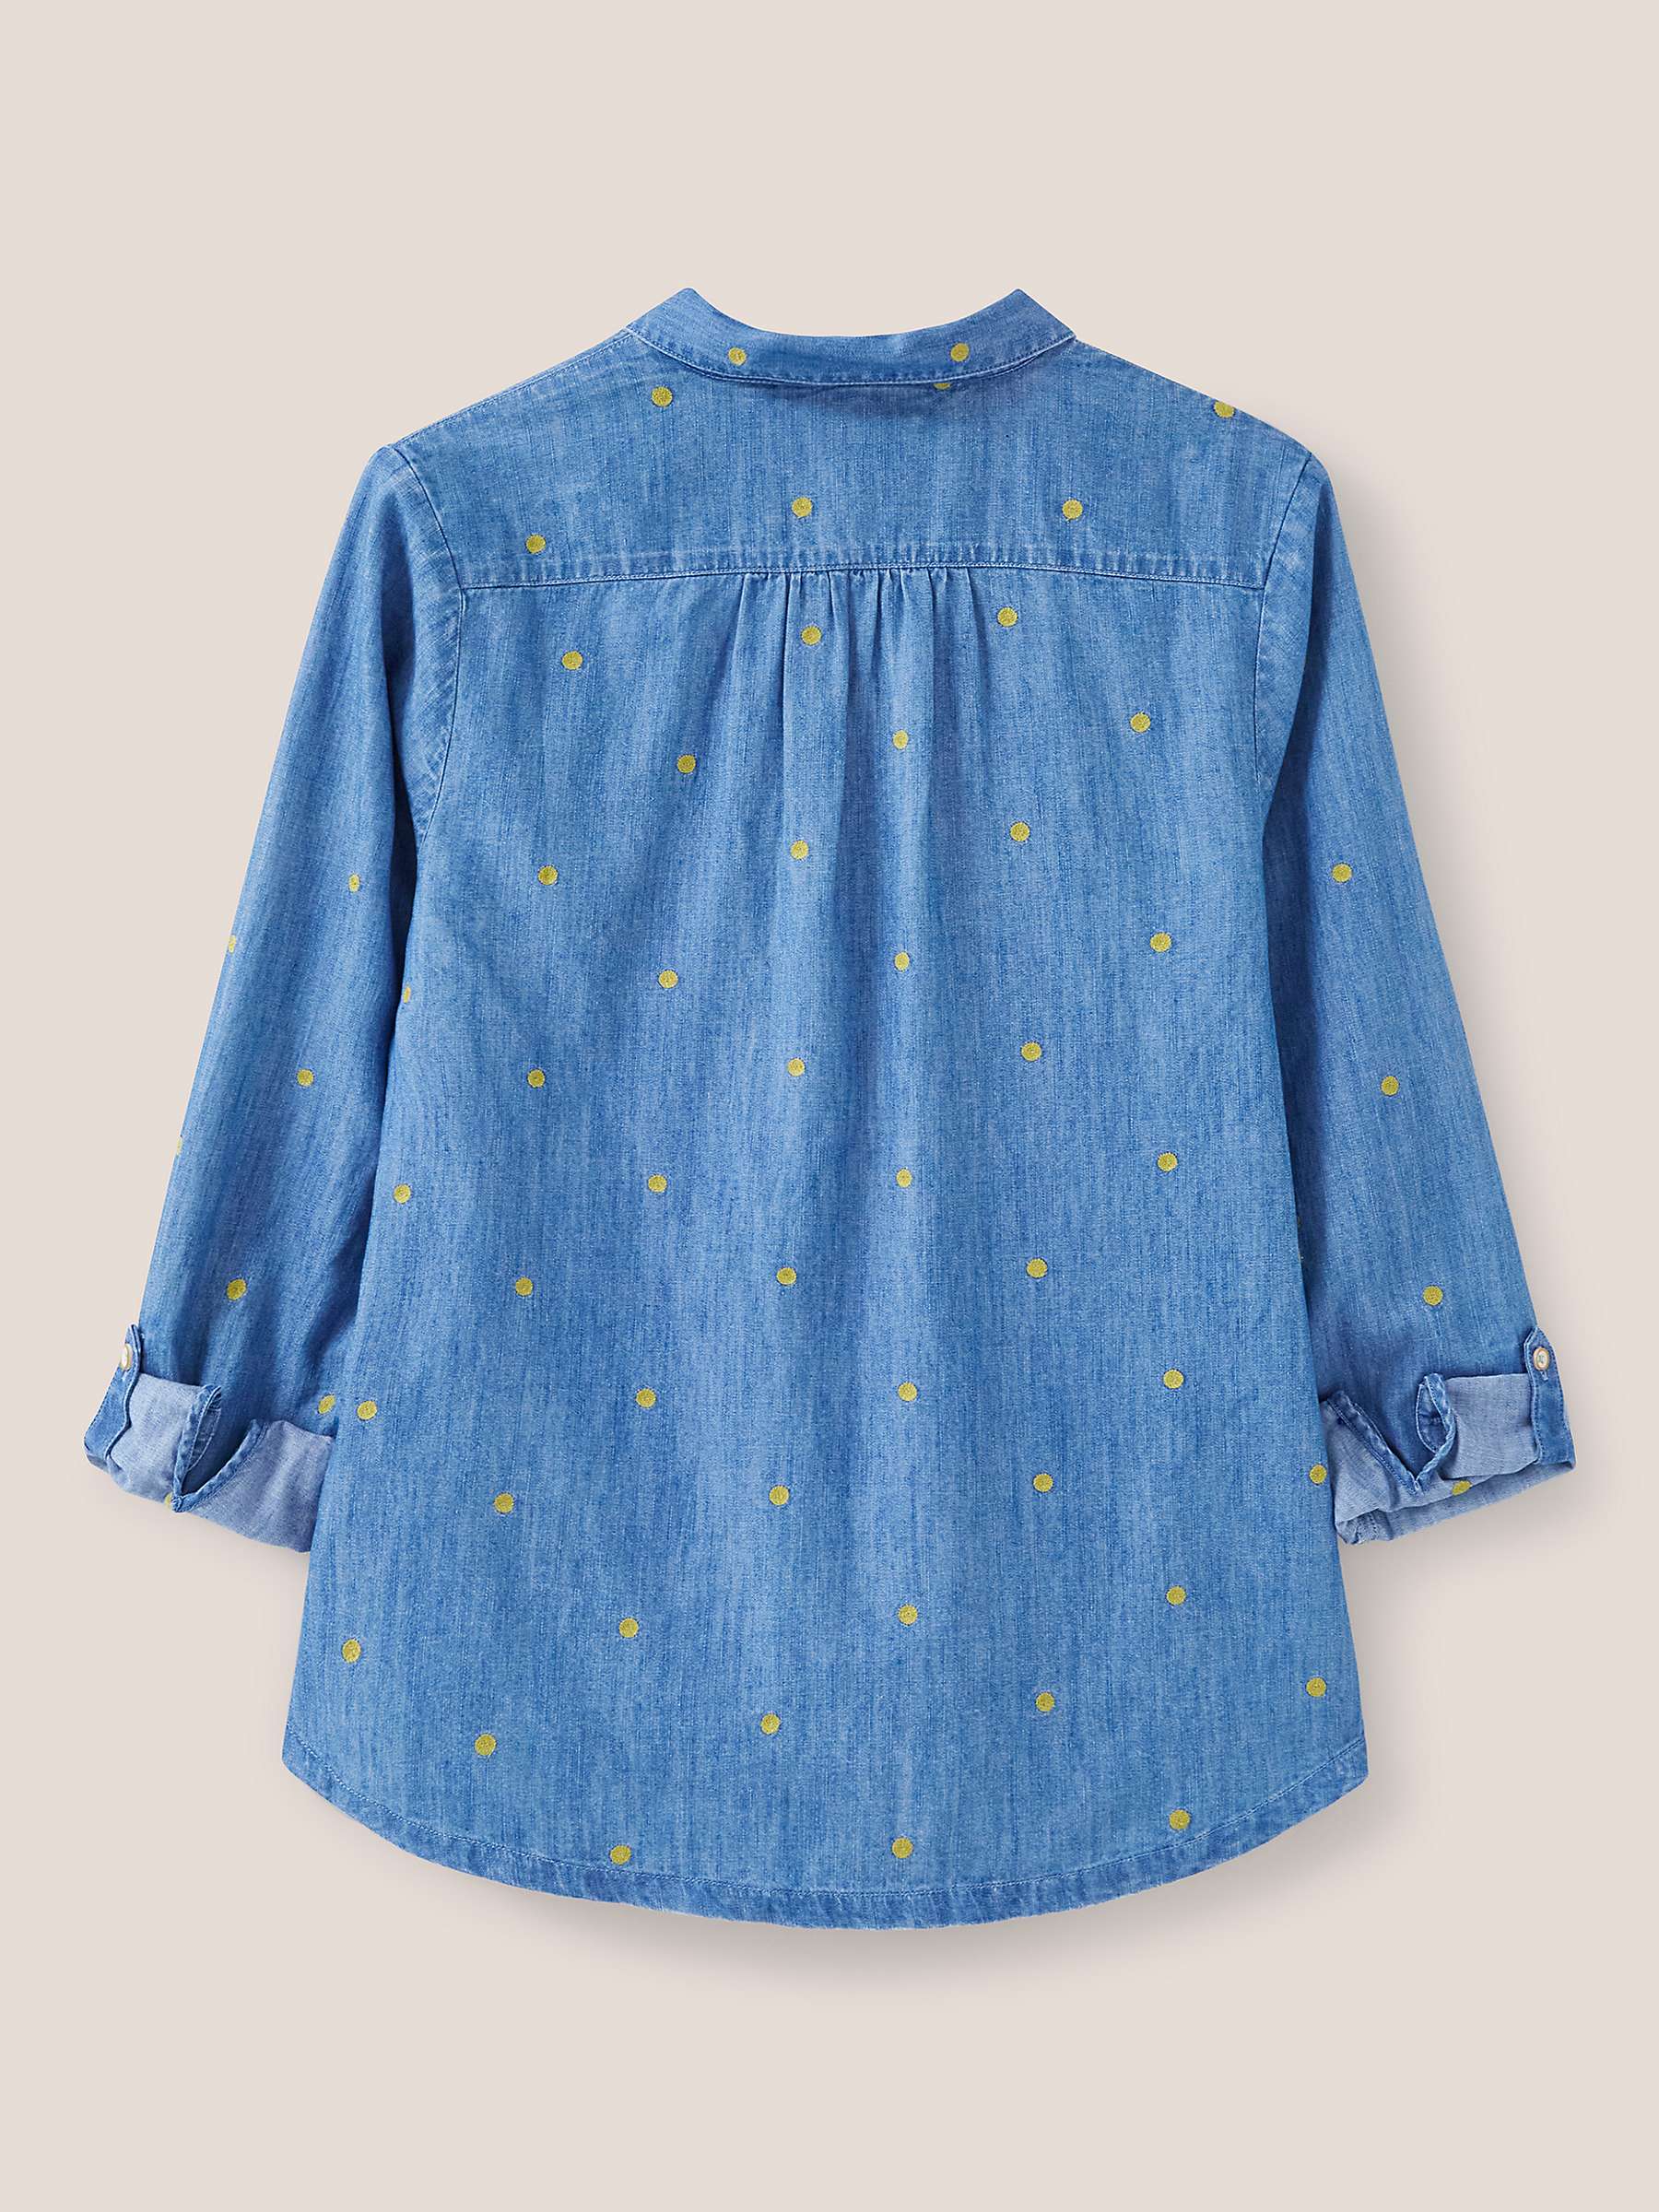 Buy White Stuff Sophie Embroidered Spot Shirt, Denim/Yellow Online at johnlewis.com